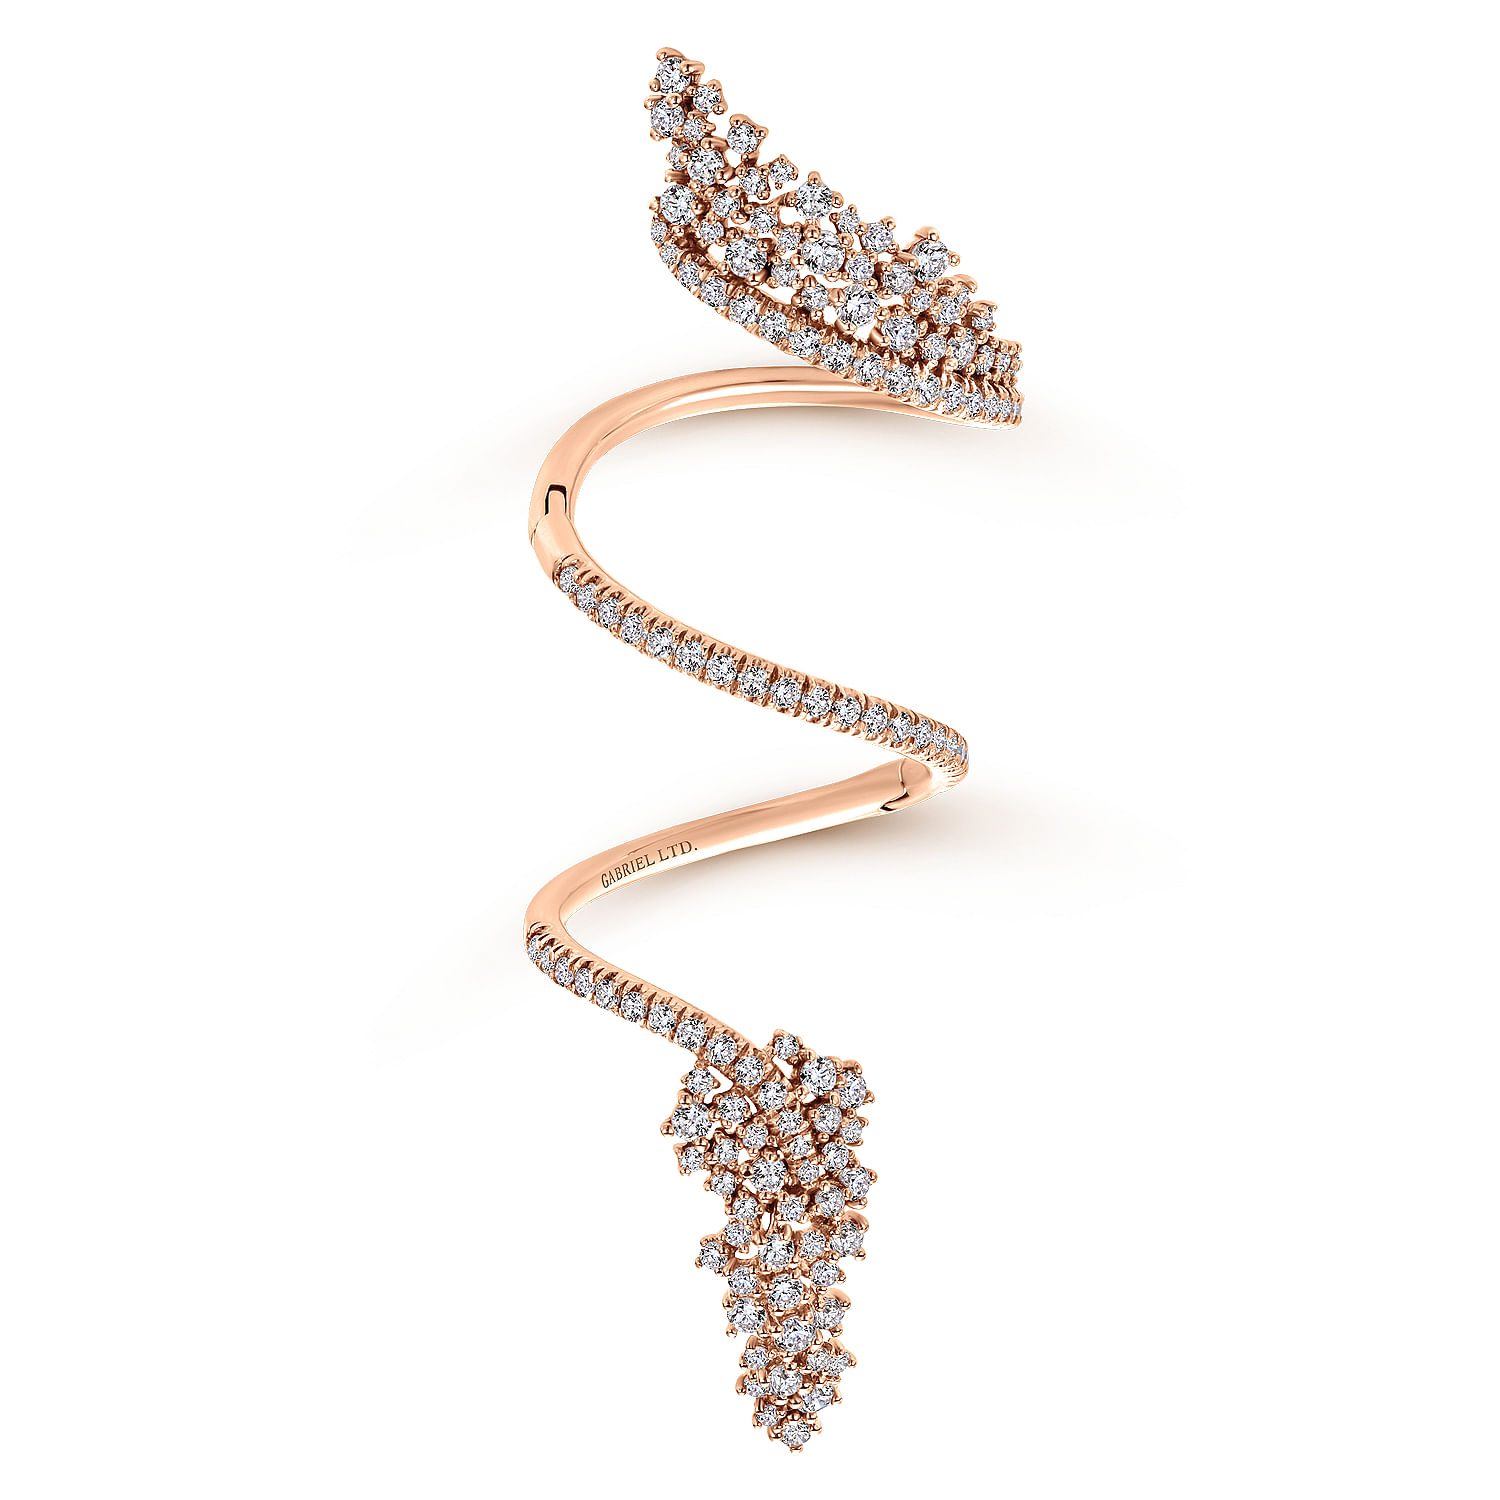 18K Rose Gold Wide Diamond Cluster Statement Wrap Ring